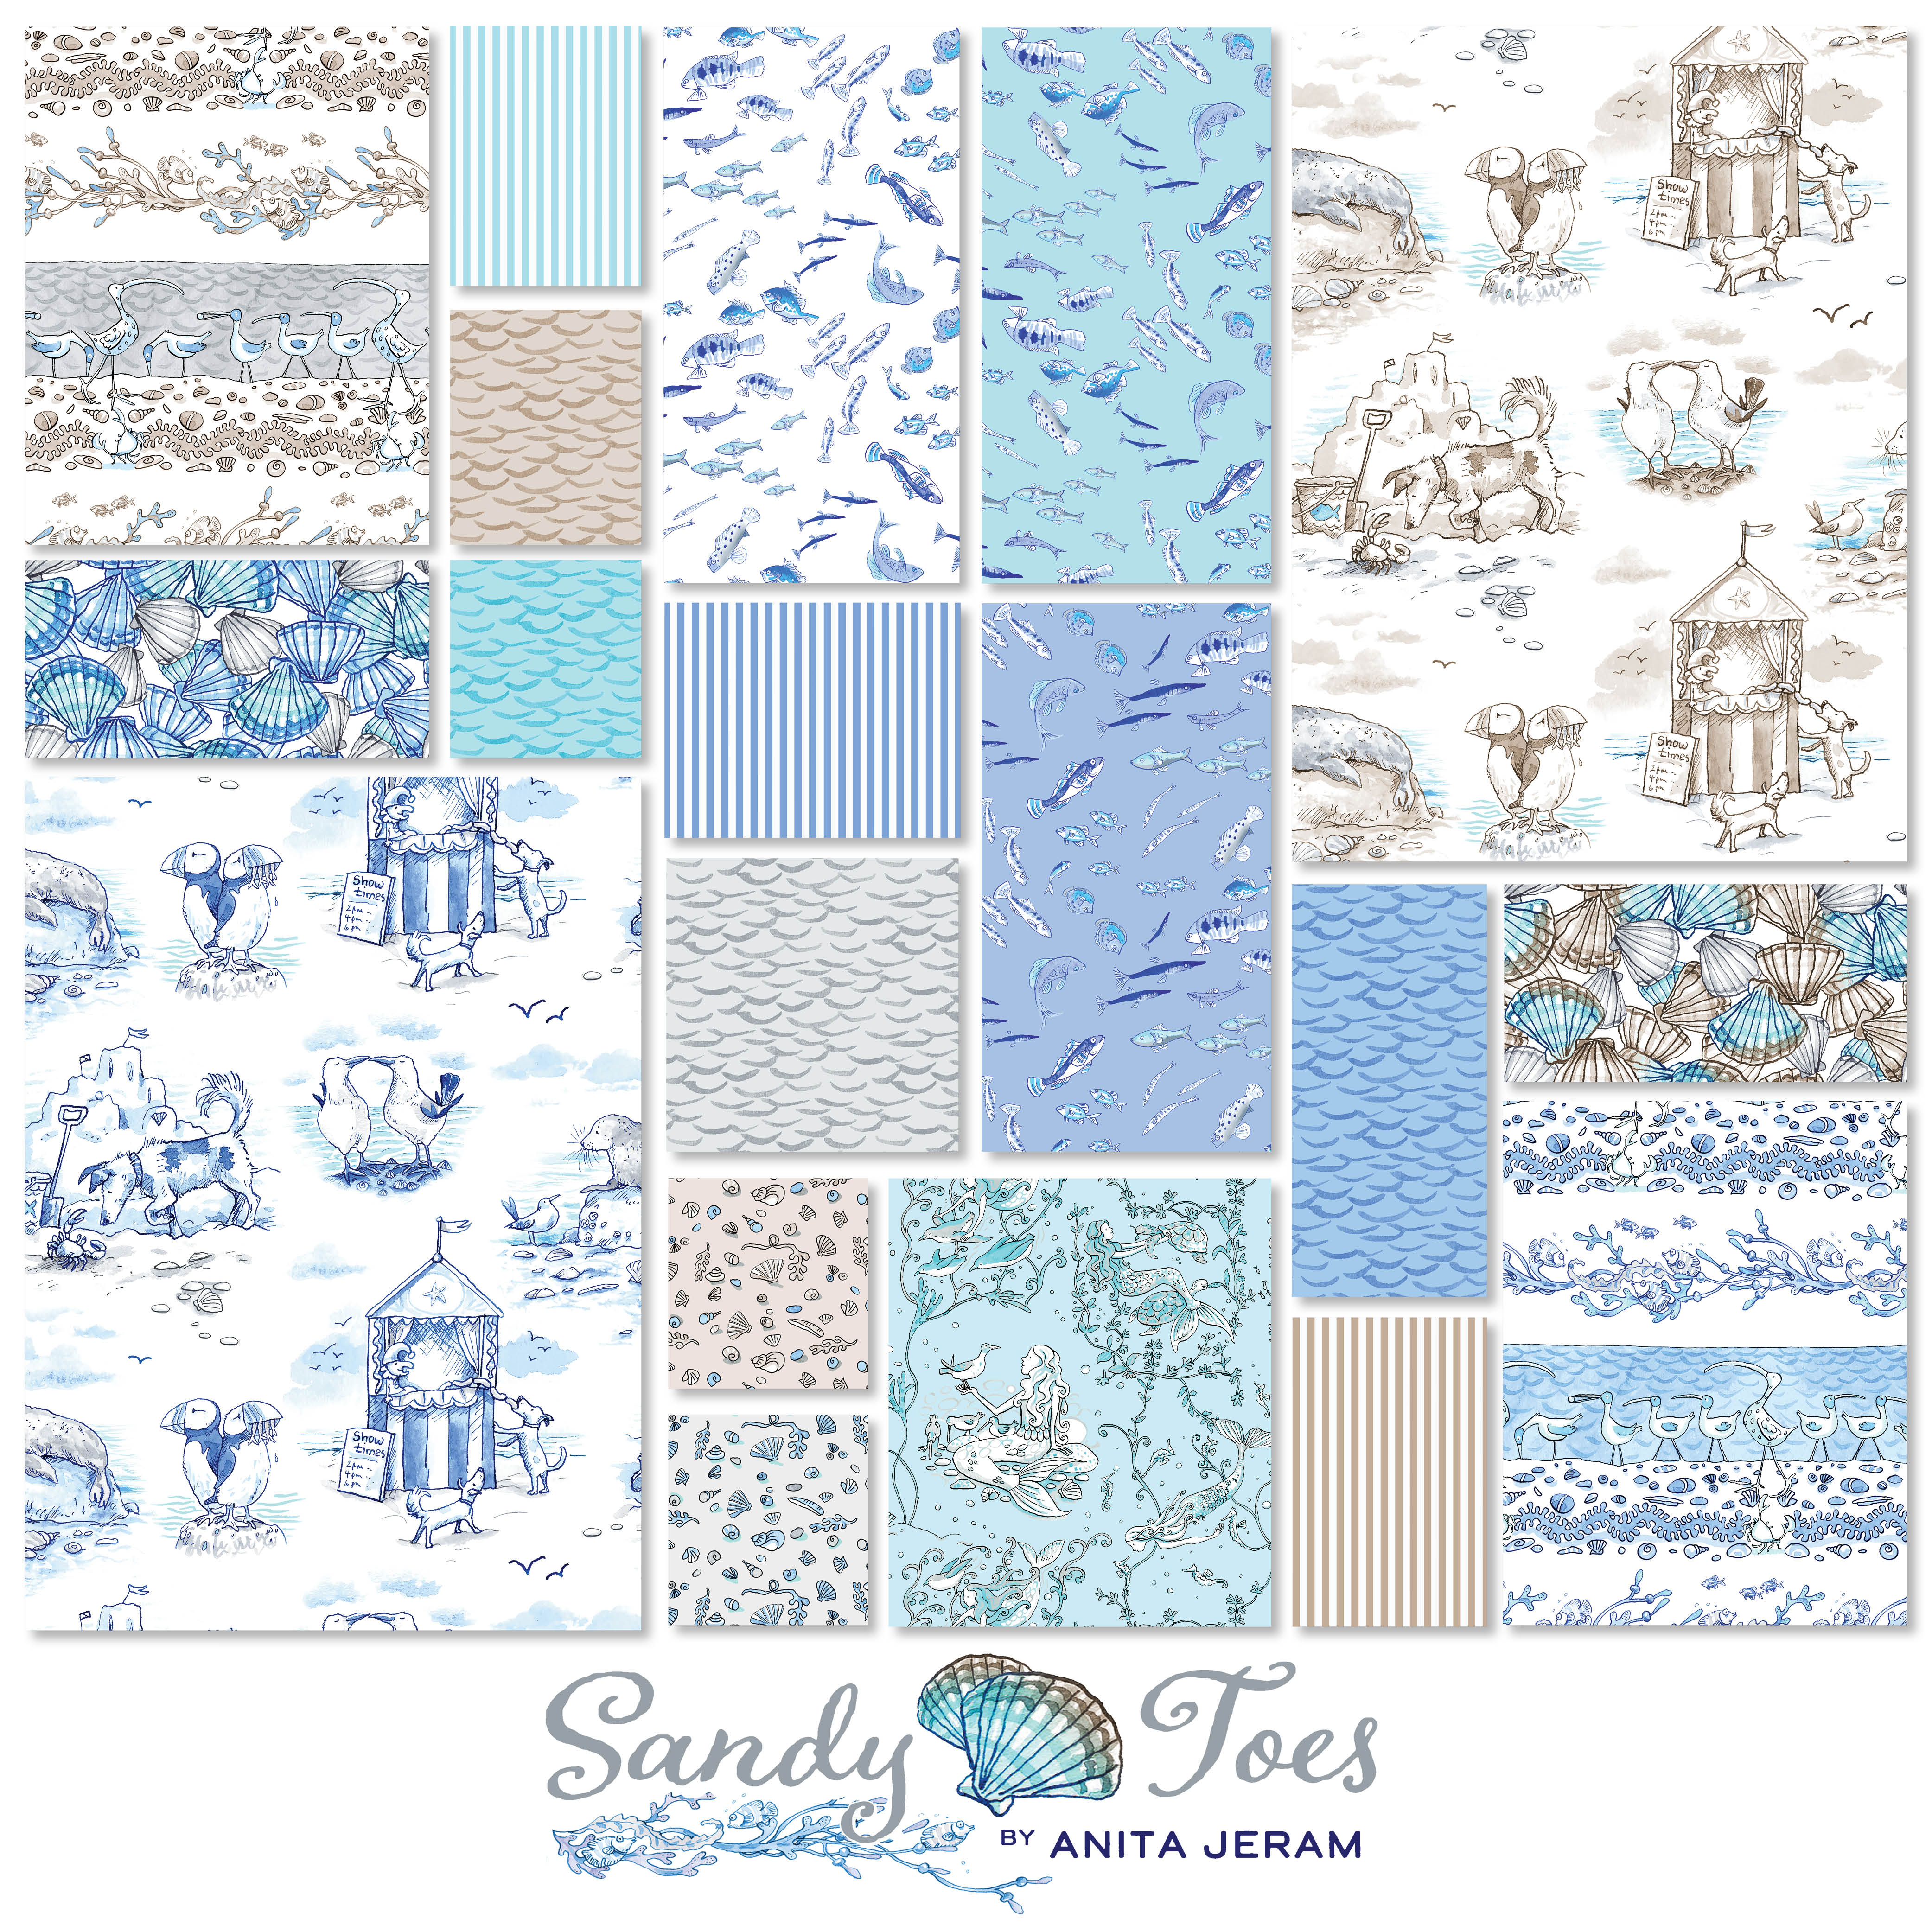 Sandy Toes - 5" Charm Pack by Anita Jeram for Clothworks (42pcs)